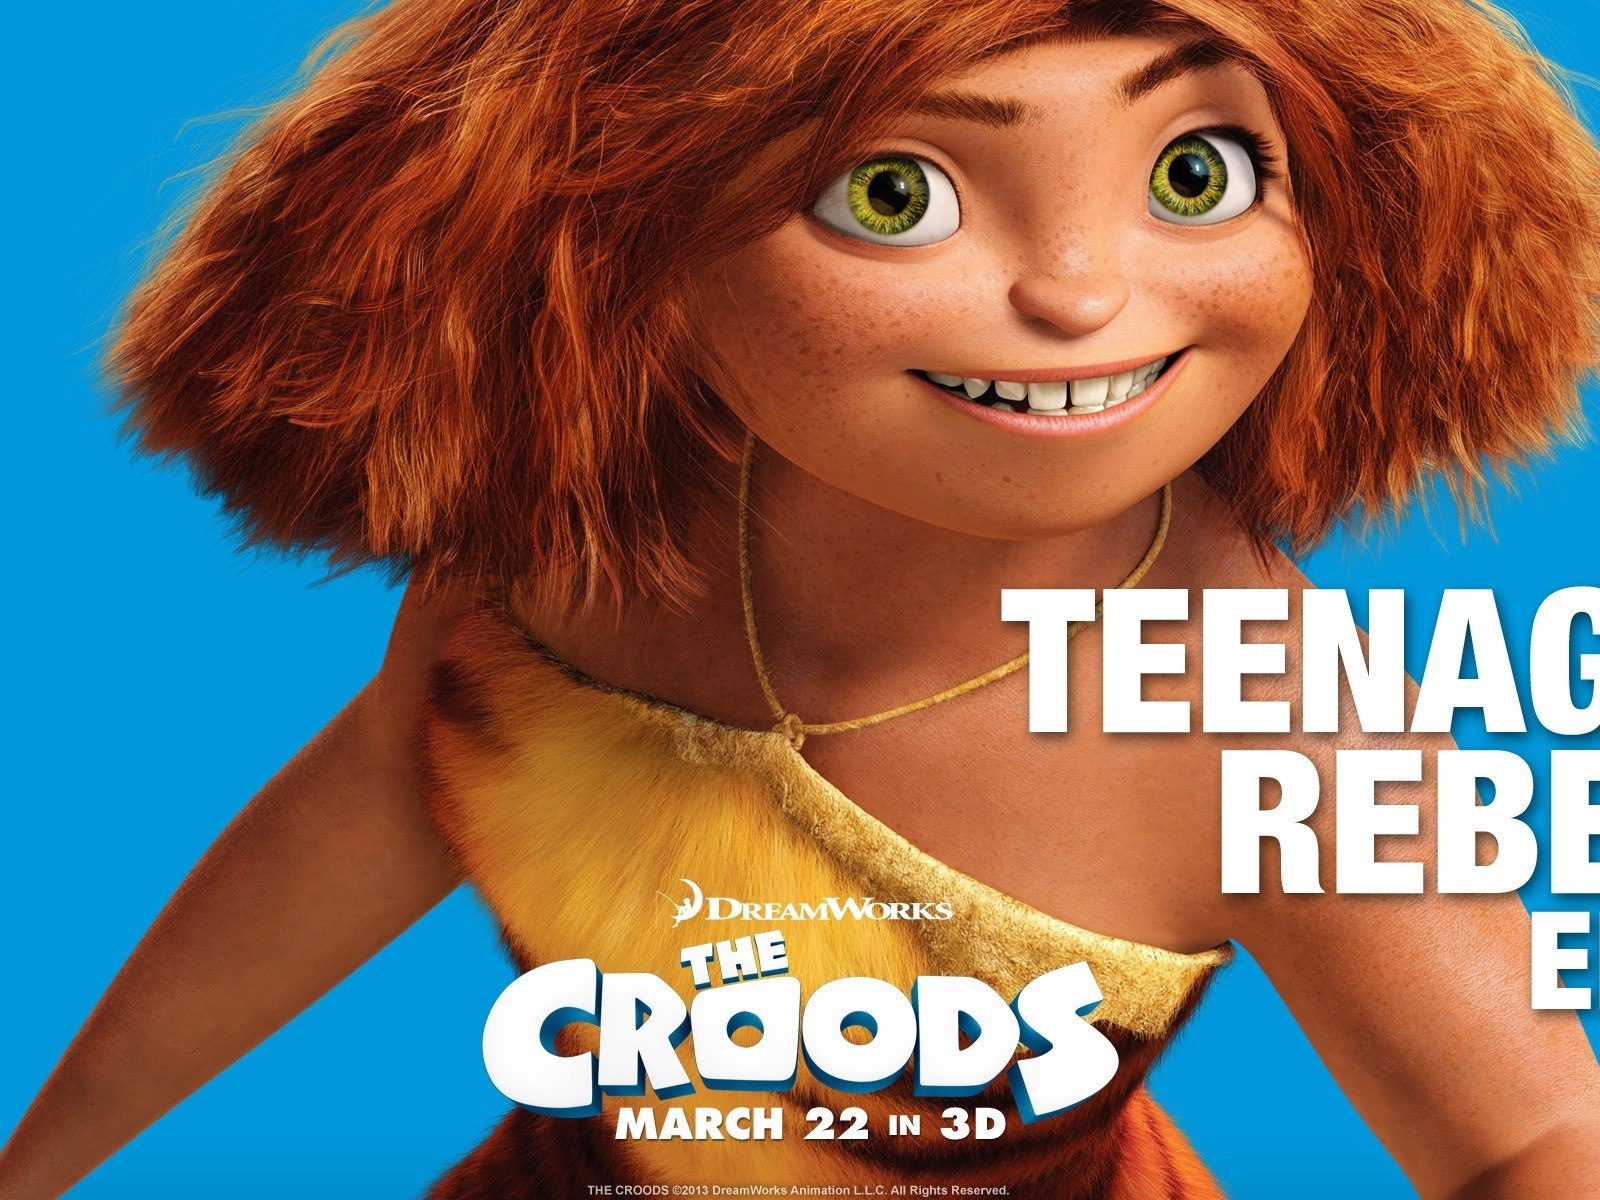 V Croods HD Movie Wallpapers #10 - 1600x1200